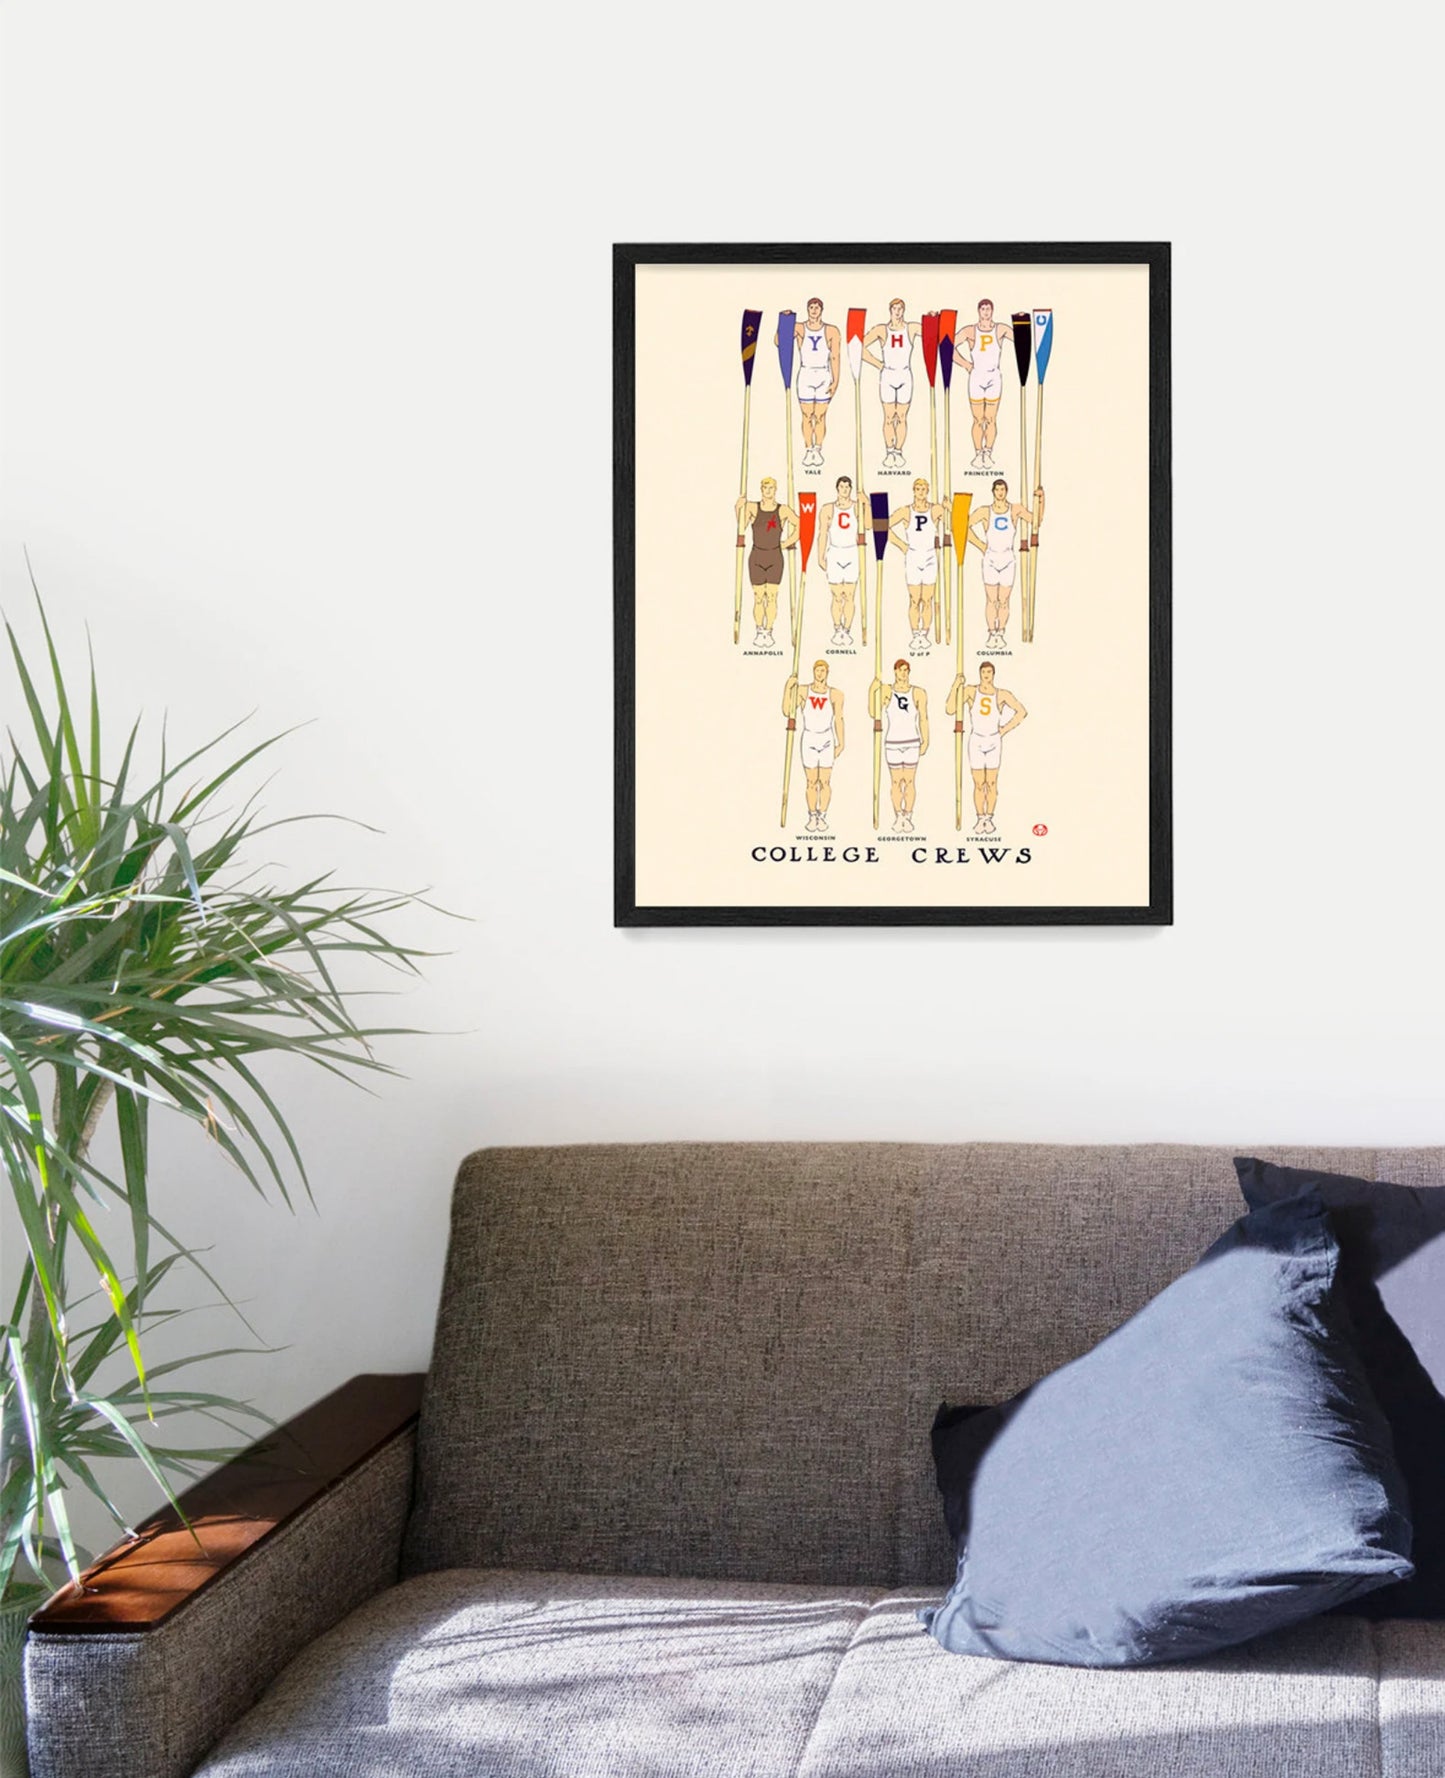 College Crew Poster, Crew Wall Art, Rowing Decor